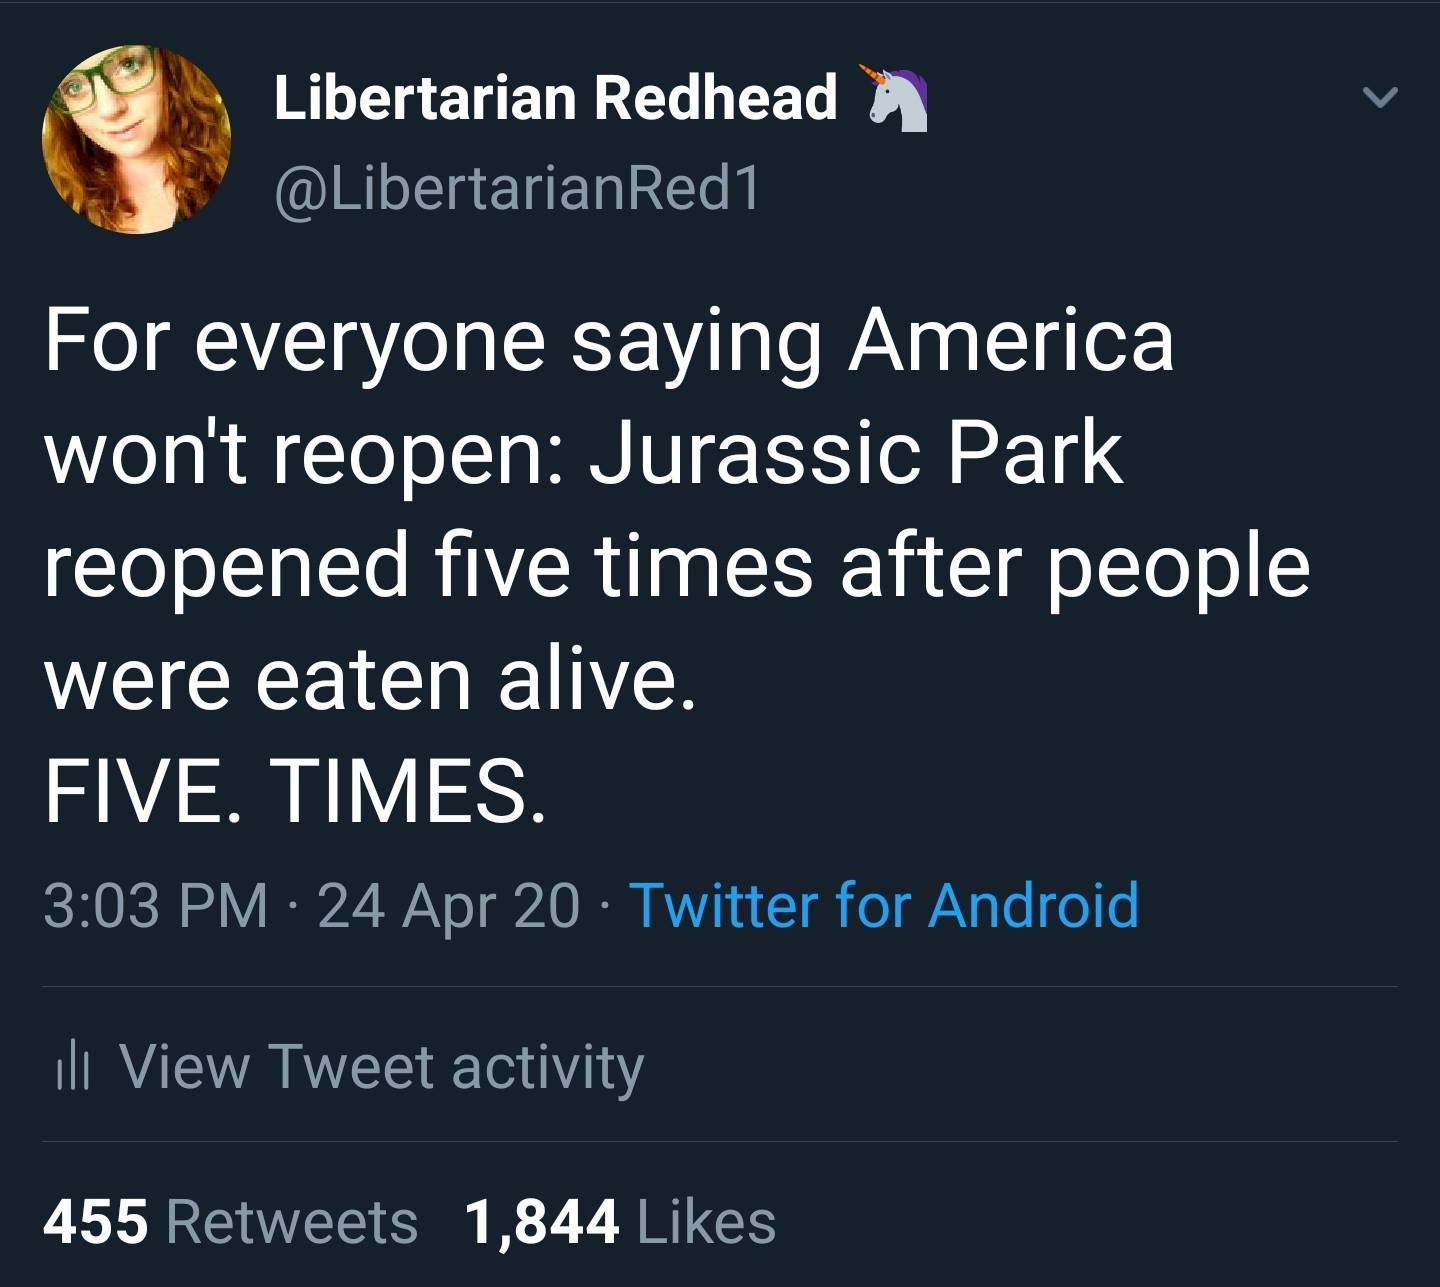 bike lane - Libertarian Redhead For everyone saying America won't reopen Jurassic Park reopened five times after people were eaten alive. Five. Times. 24 Apr 20 Twitter for Android ili View Tweet activity 455 1,844